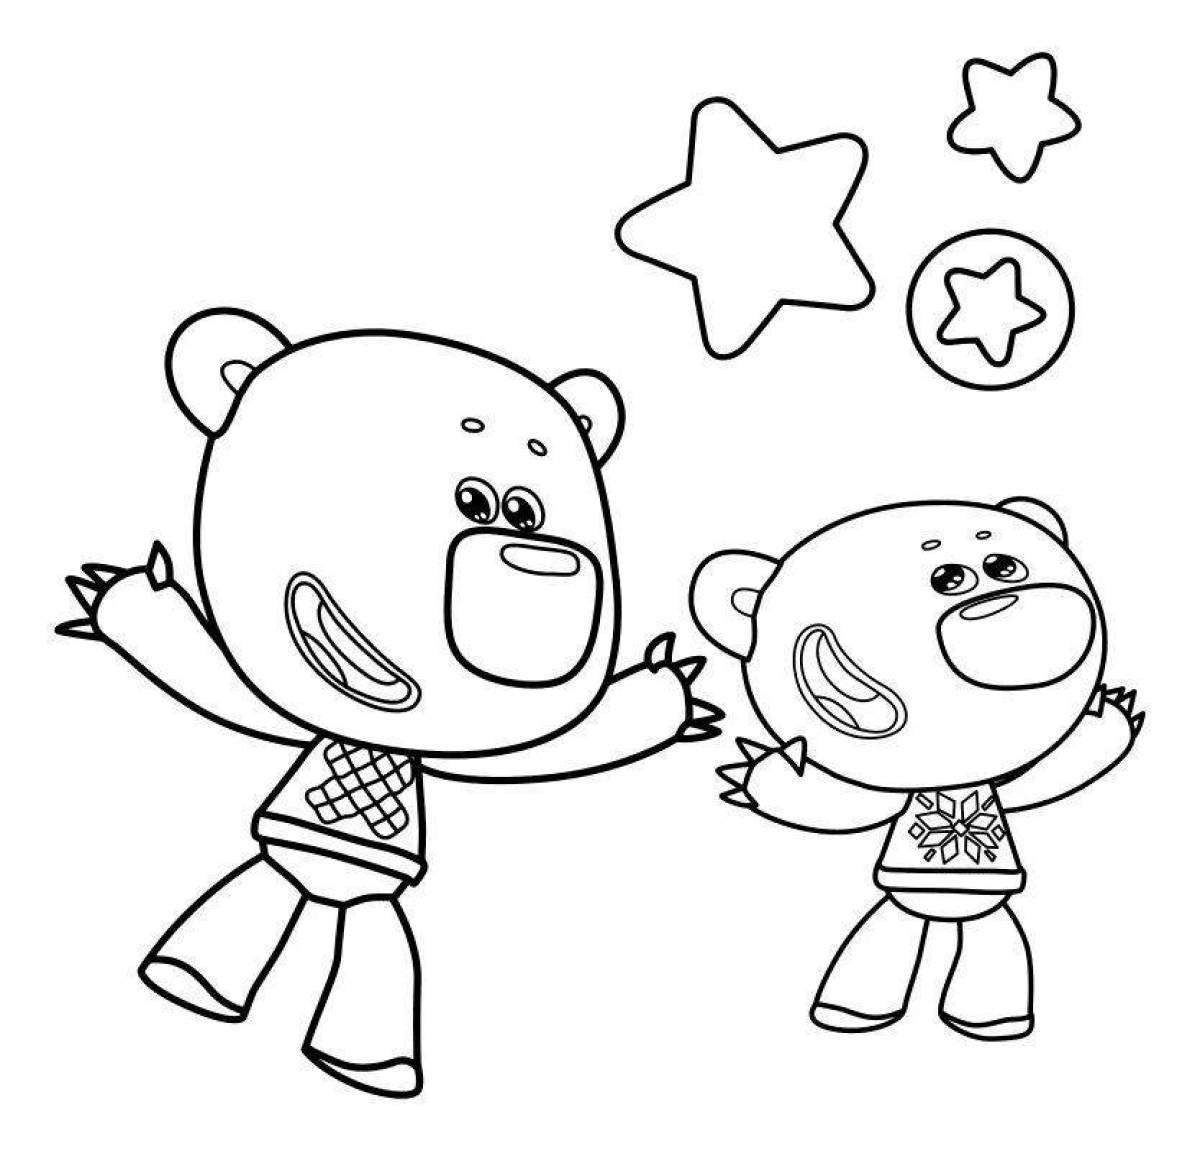 Cute bear coloring pages for kids